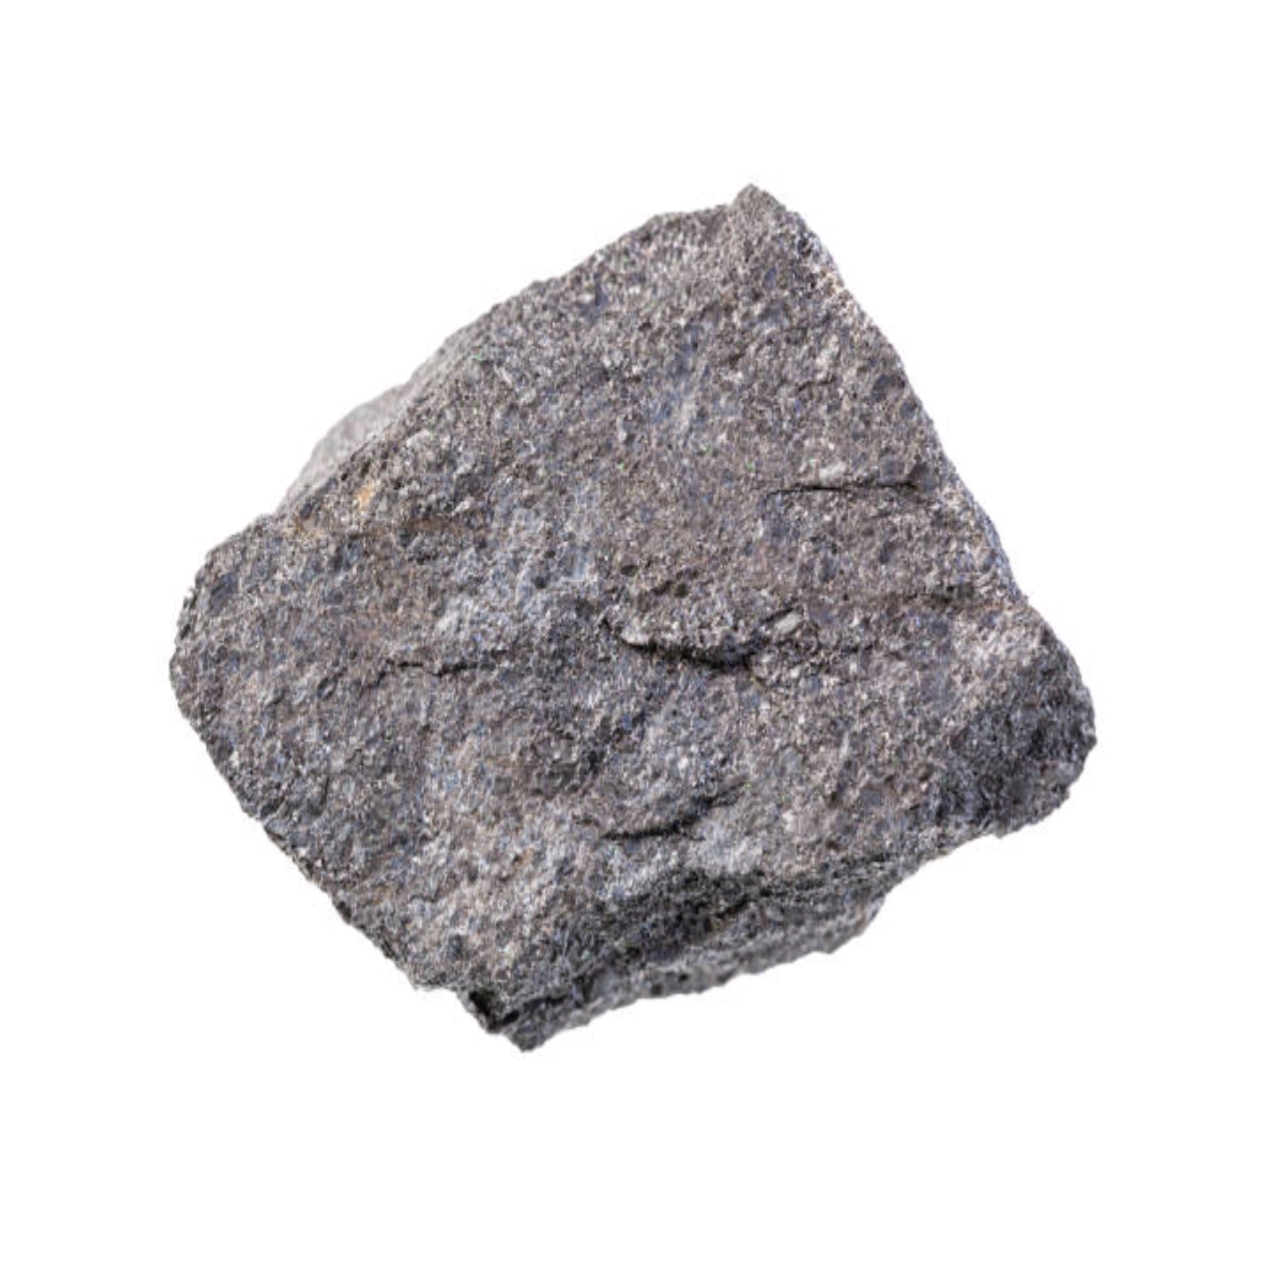 Chromite Rock Isolated